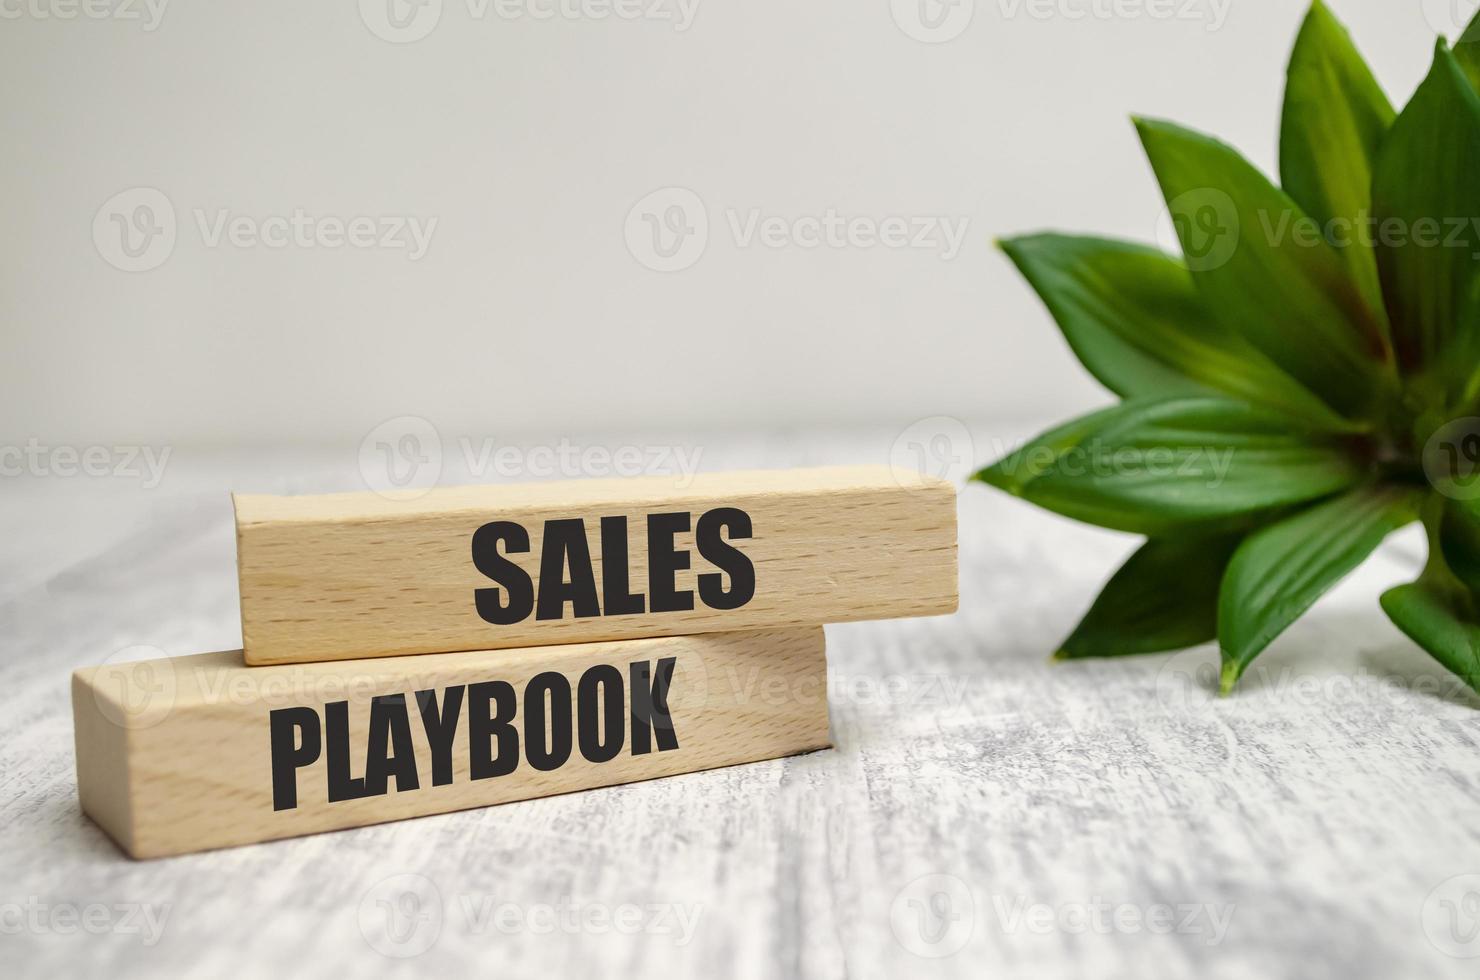 SALES PLAYBOOK words on wooden blocks and green plant on wooden background photo